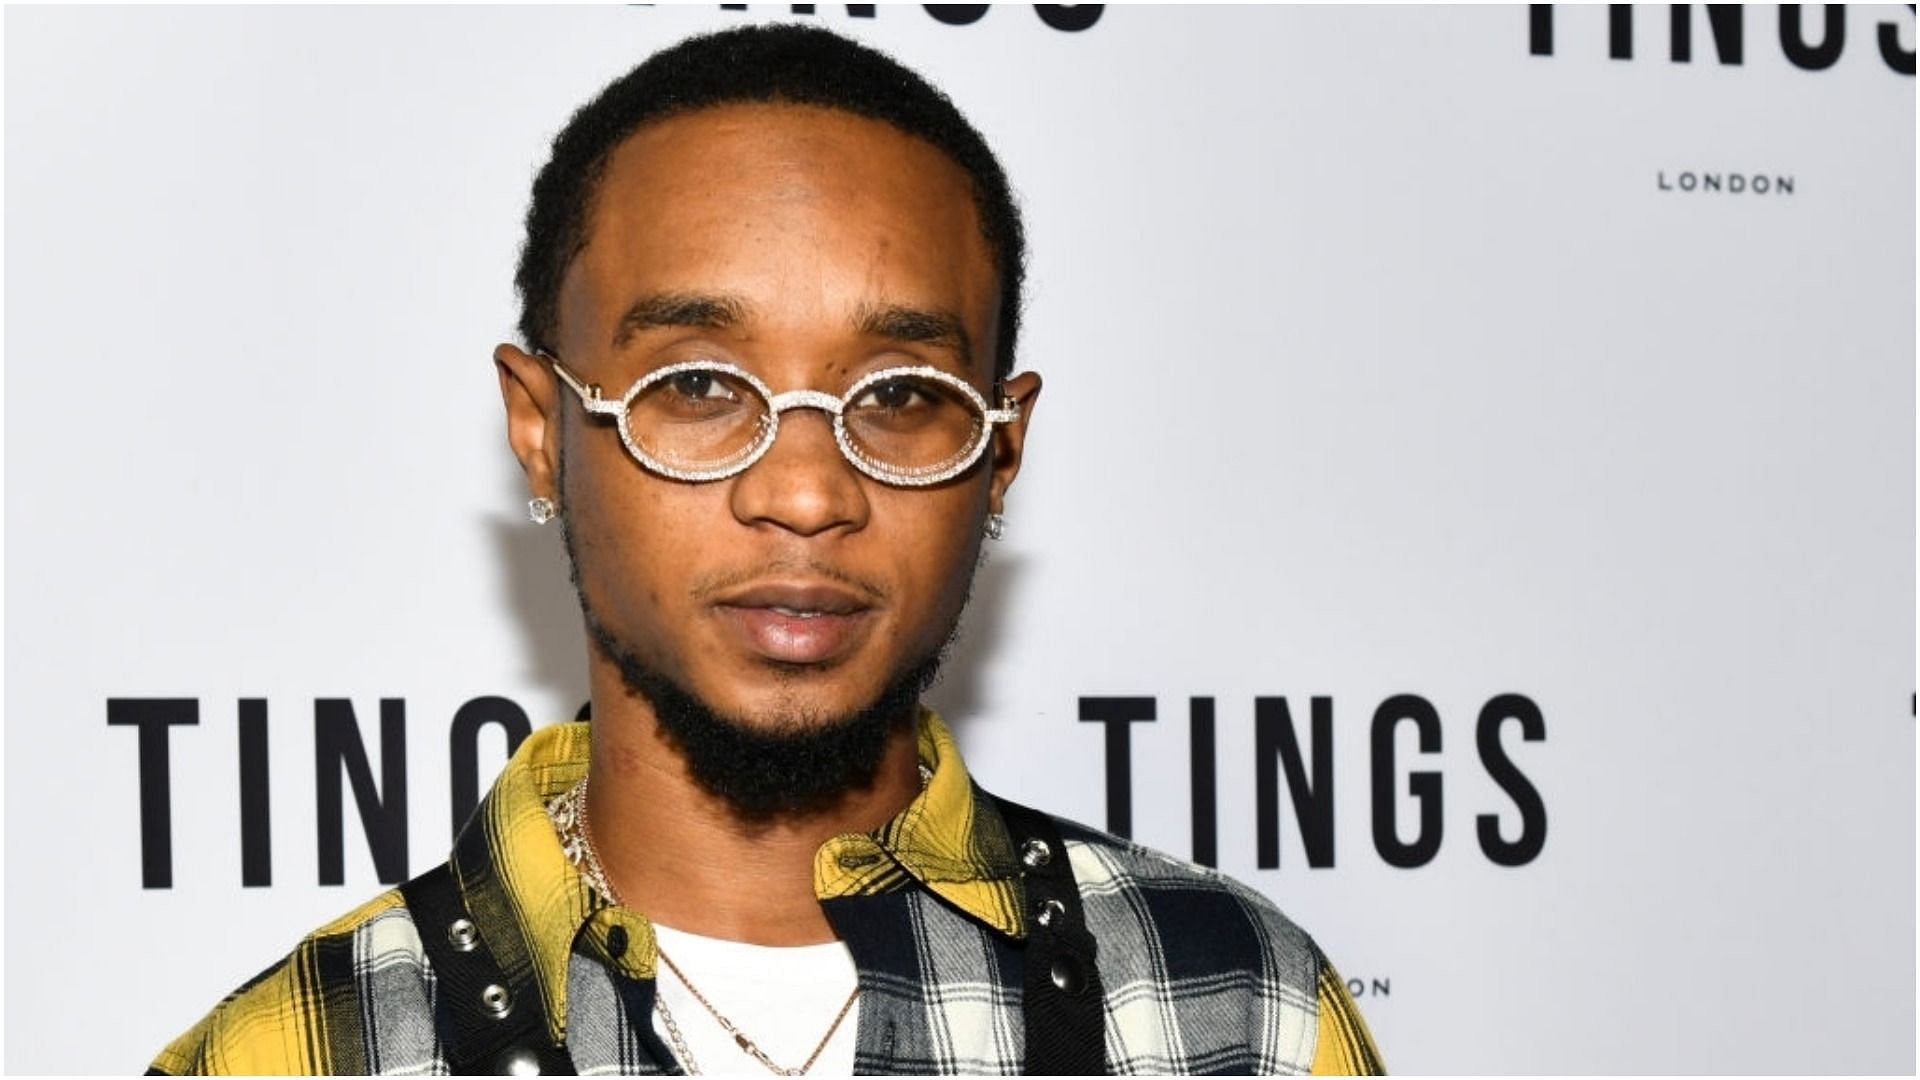 Slim Jxmmi&#039;s girlfriend has made some serious accusations against him (Image via Rodin Eckenroth/Getty Images)